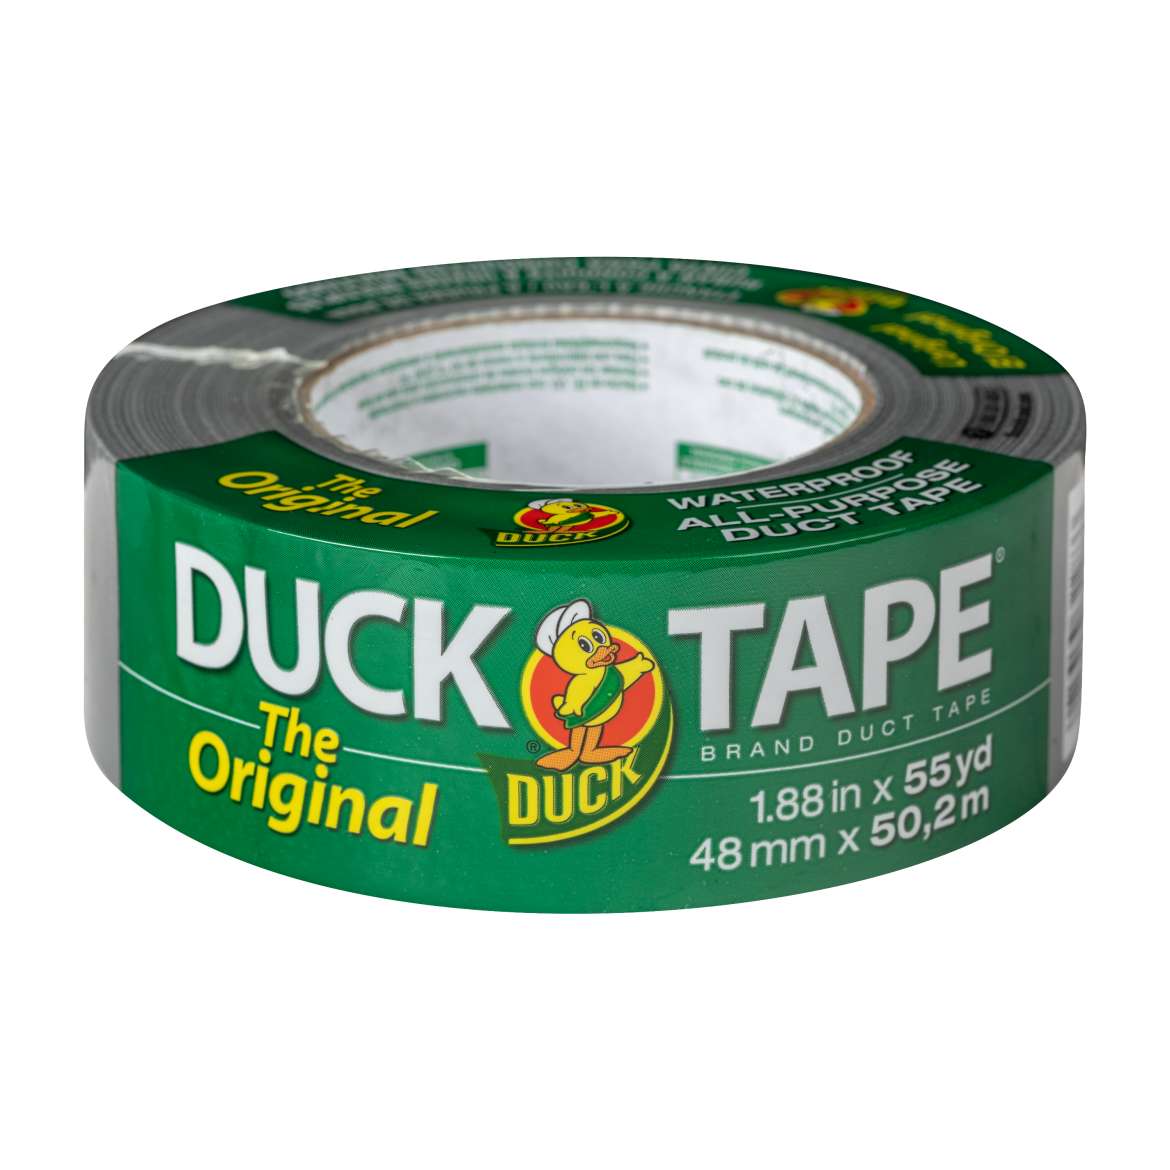 The Original Duck Tape® Brand Duct Tape Image